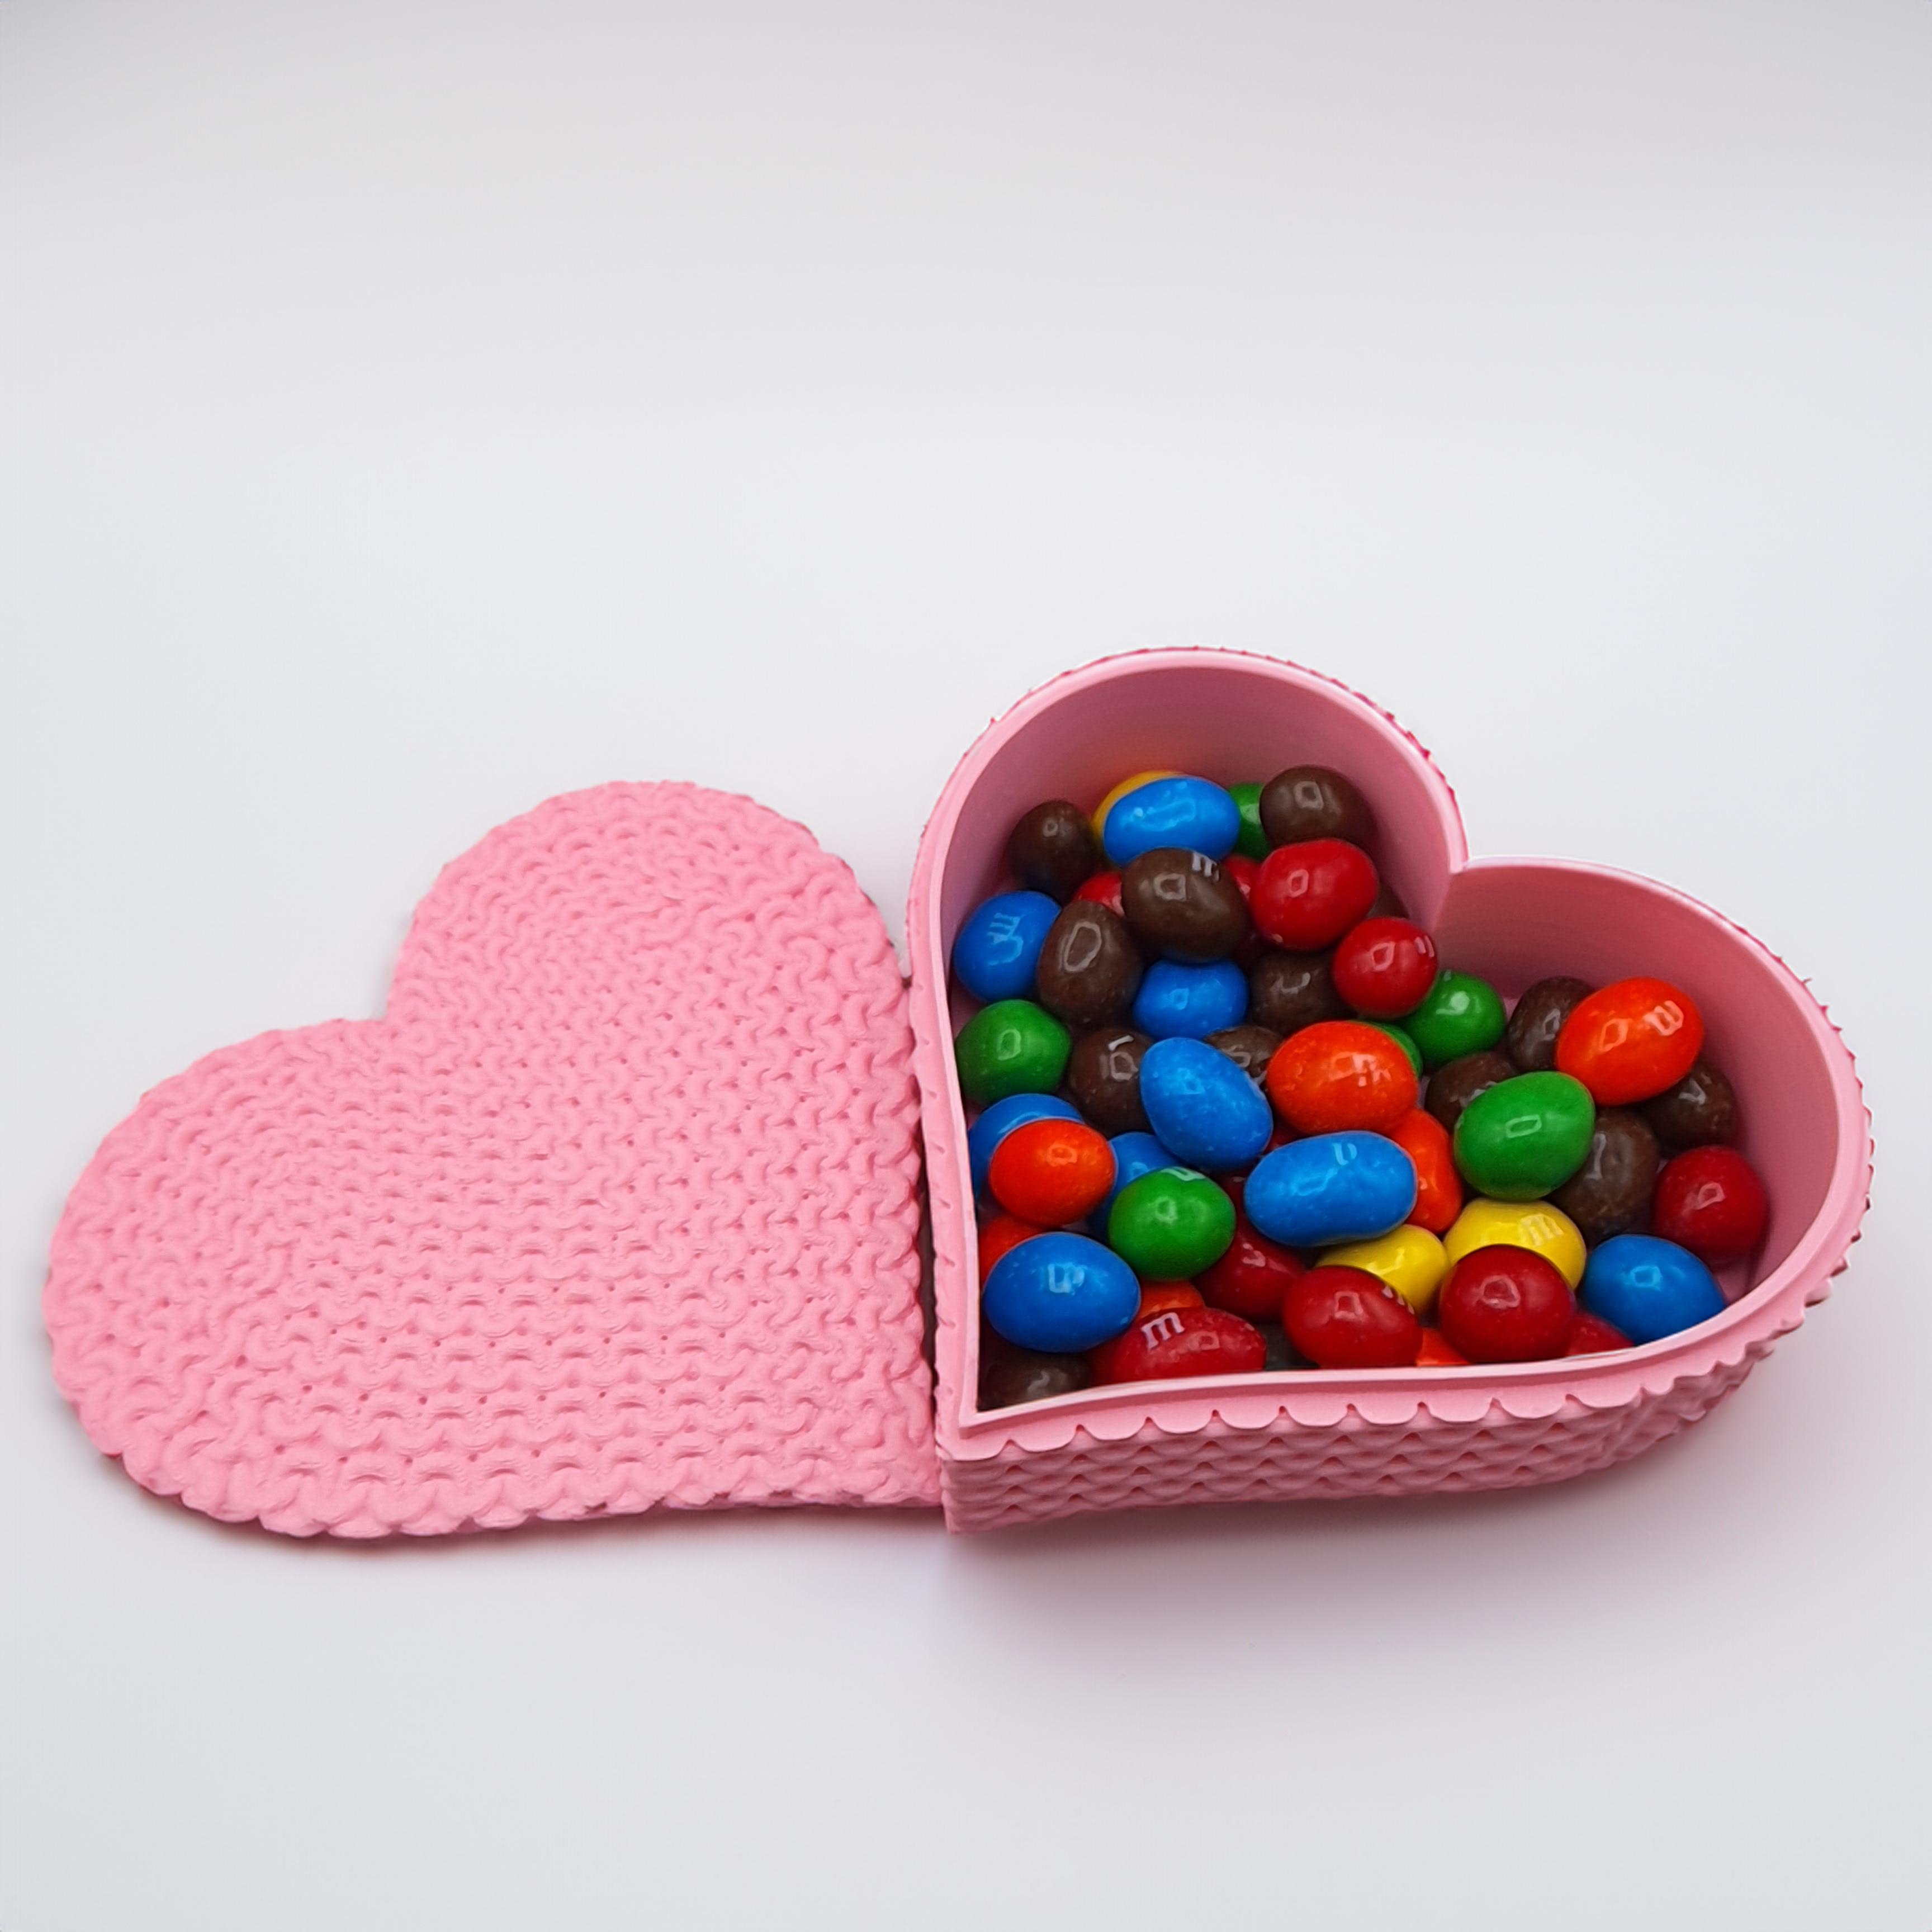 HEART KNITTED CROCHET CONTAINER VALENTINES STORAGE 3d model